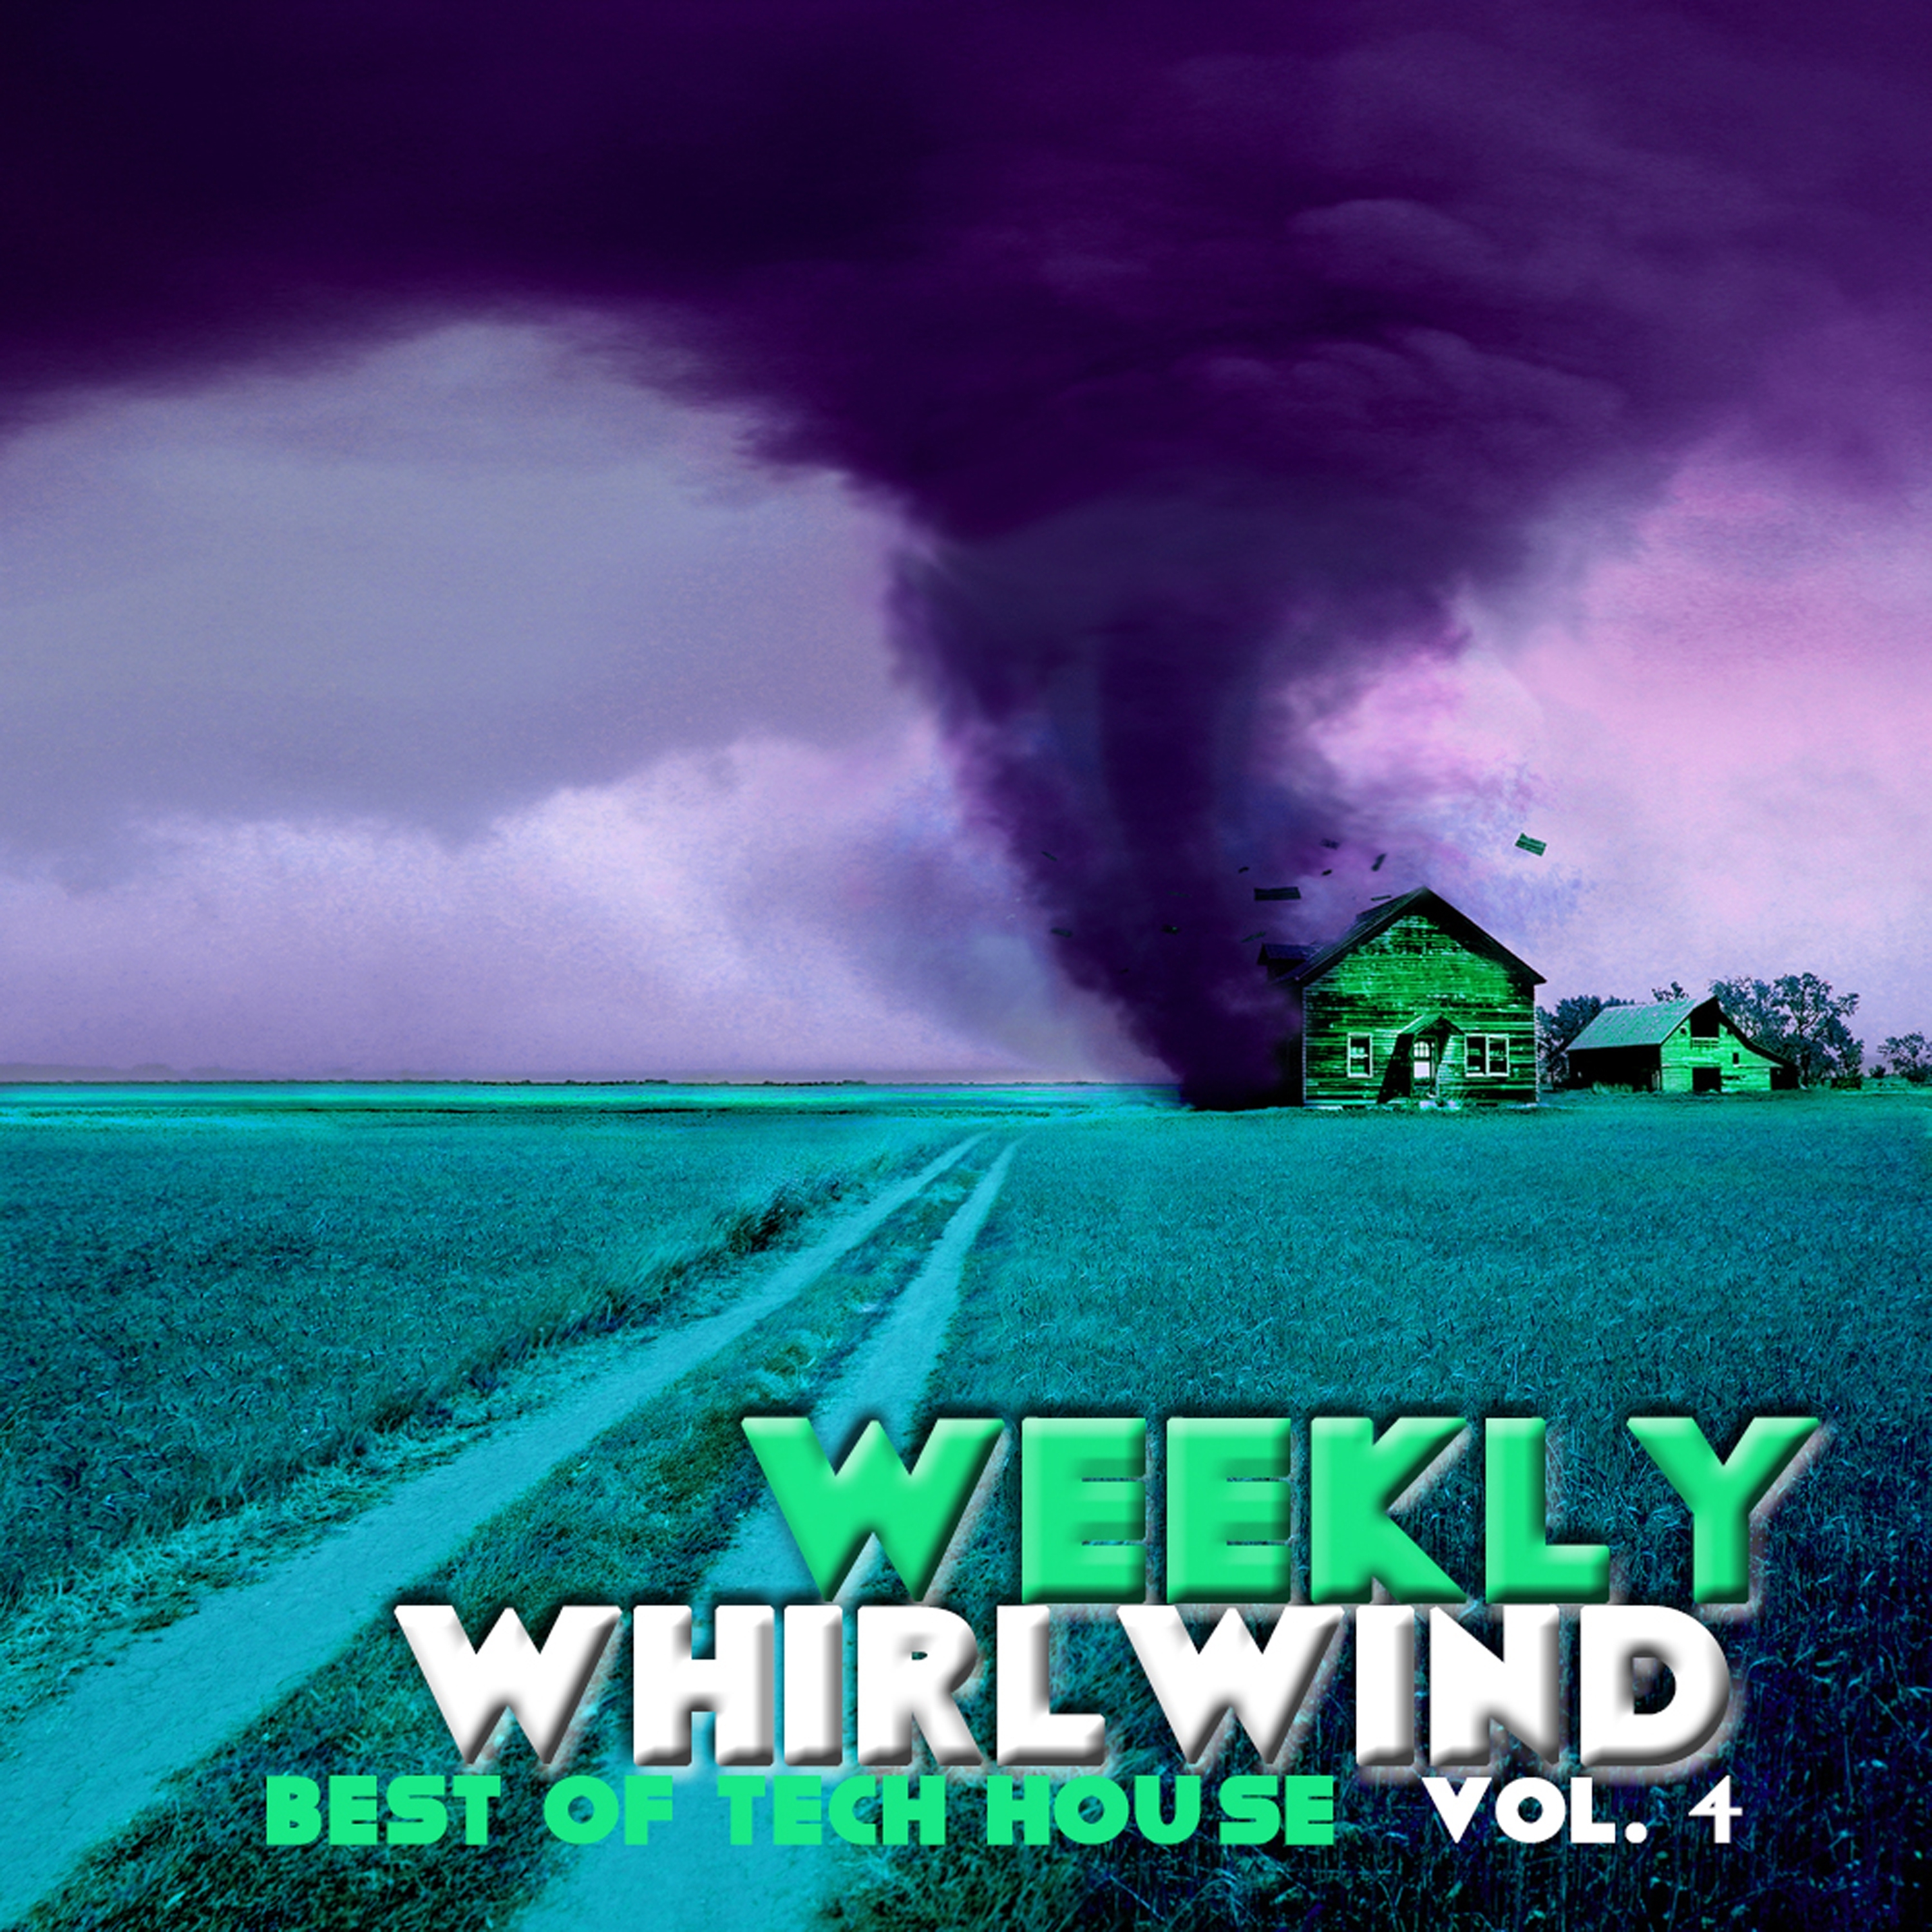 Weekly Whirlwind, Vol. 4 - Best of Tech House